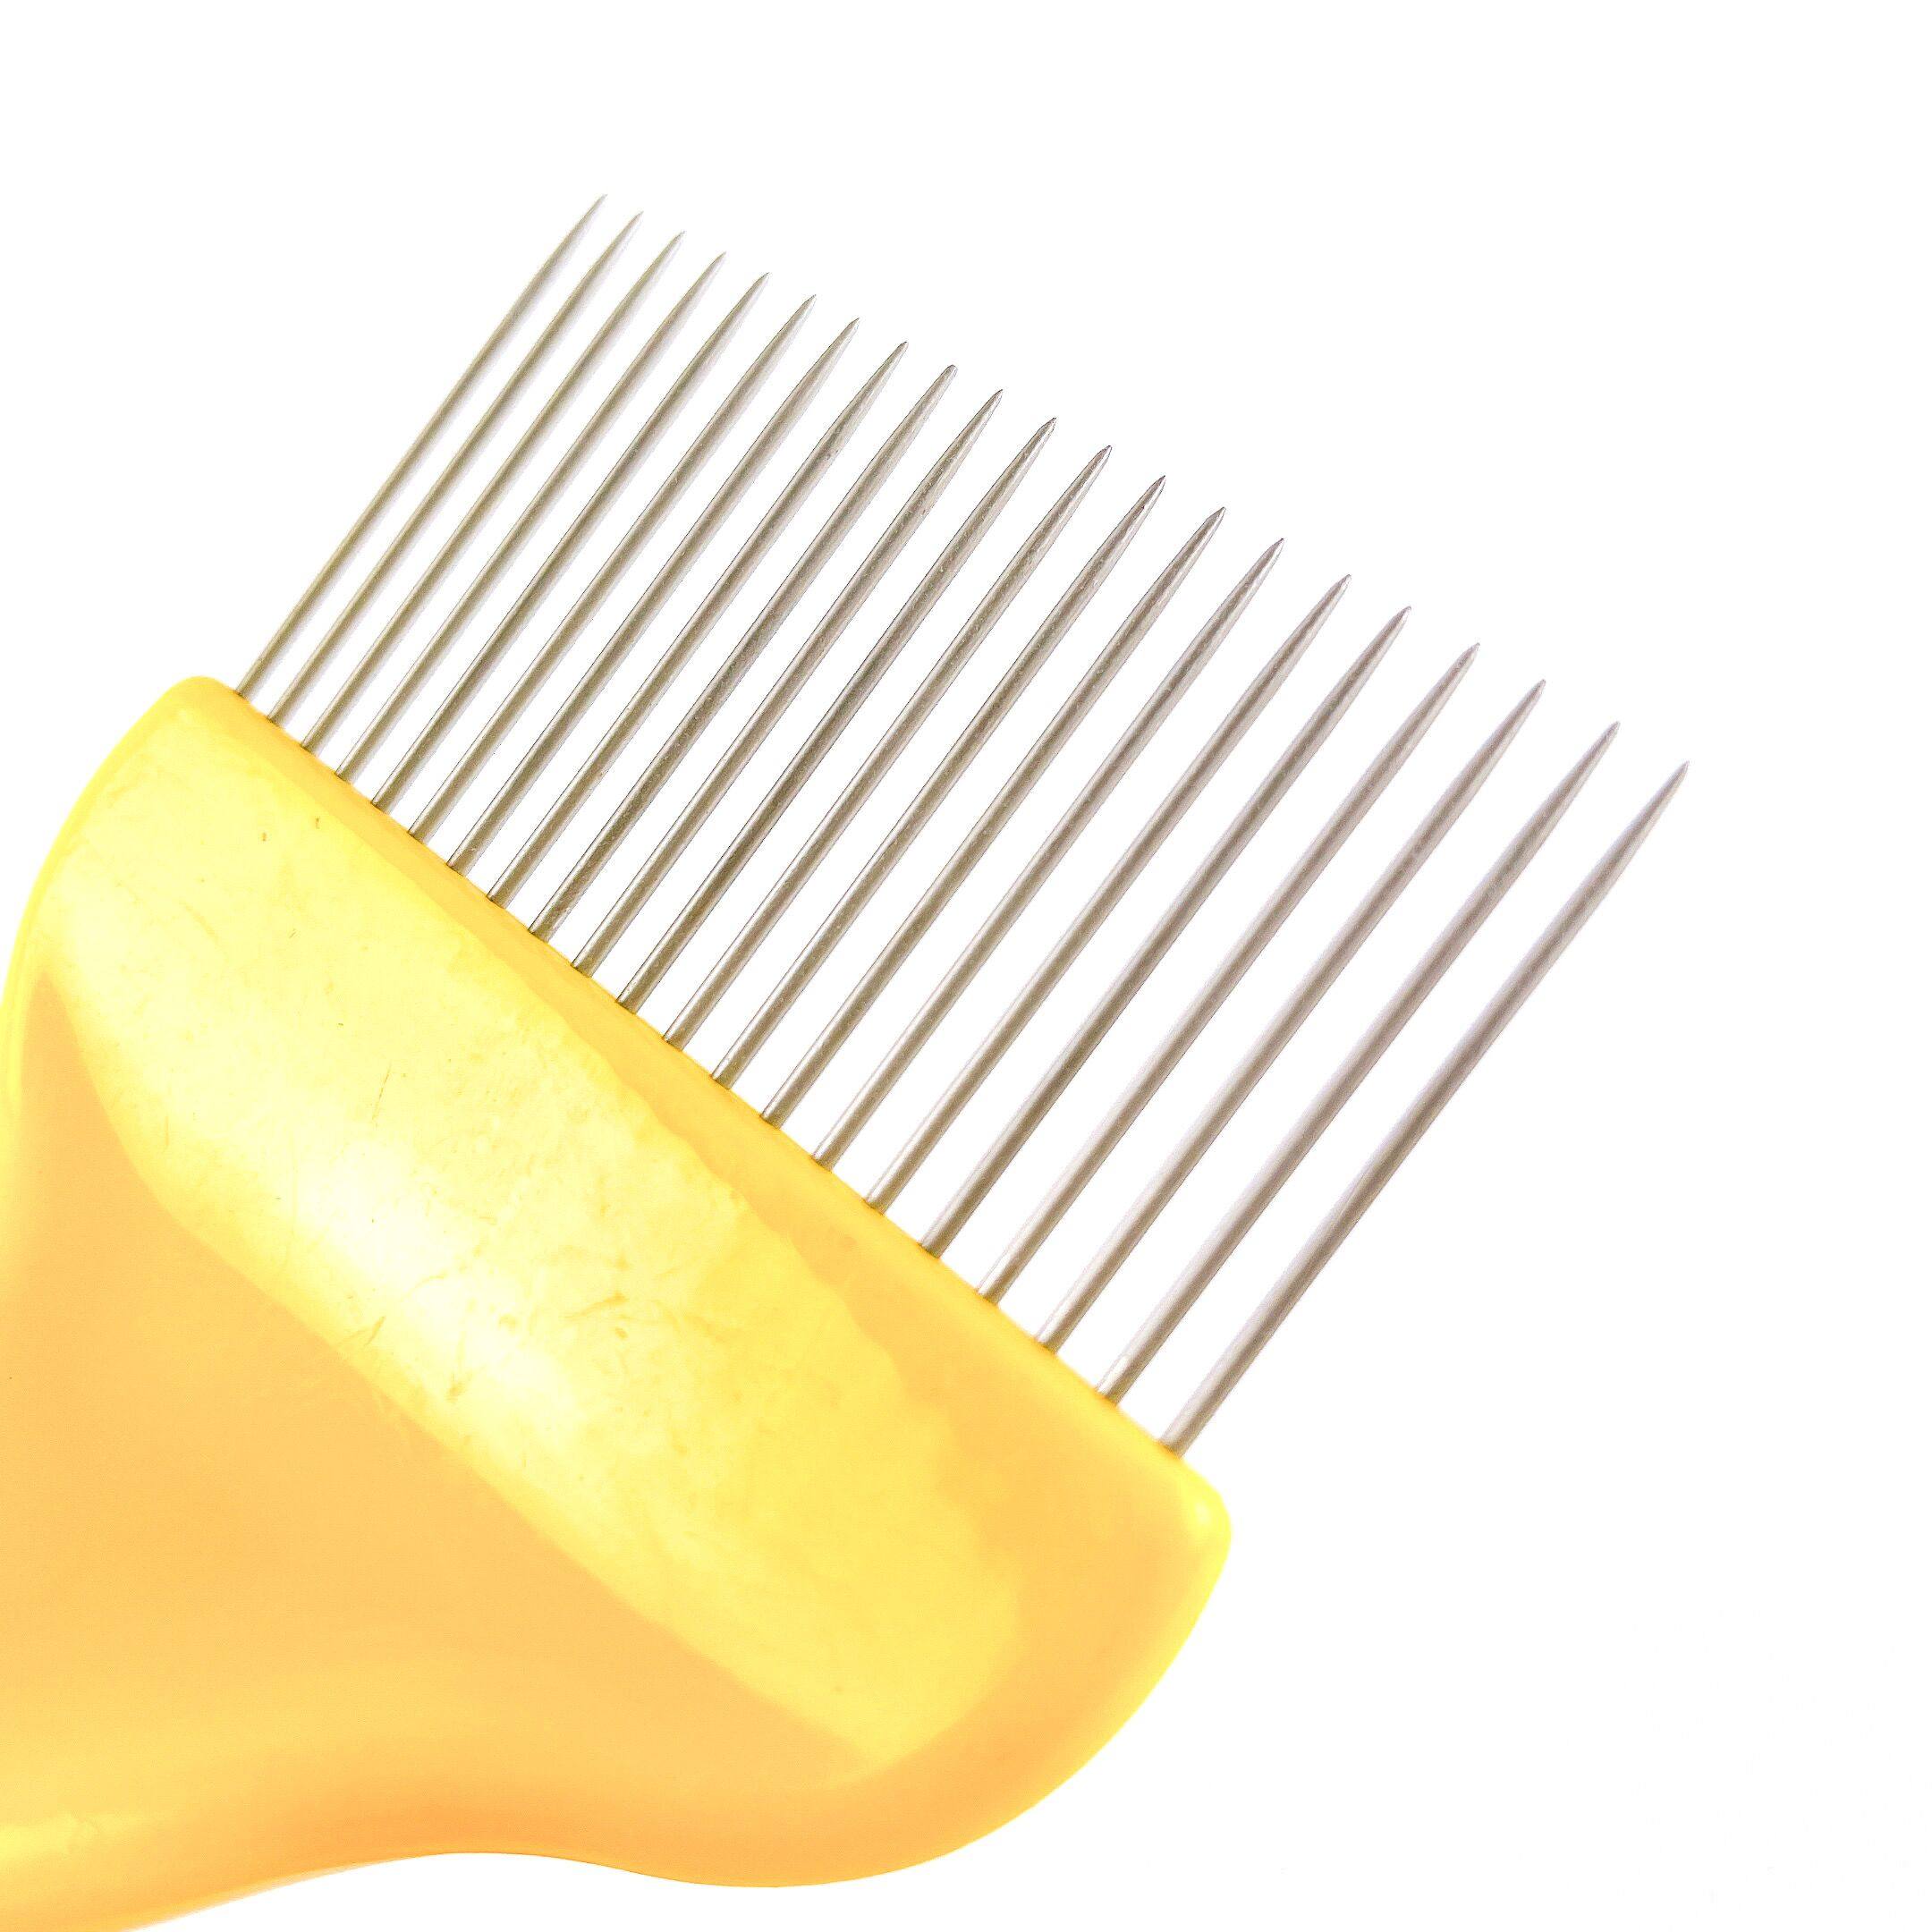 Good Quality 21pin Stainless Steel Tines Comb Uncapping Fork Needle Knife Scraper Bee Beekeeping Honey Tools